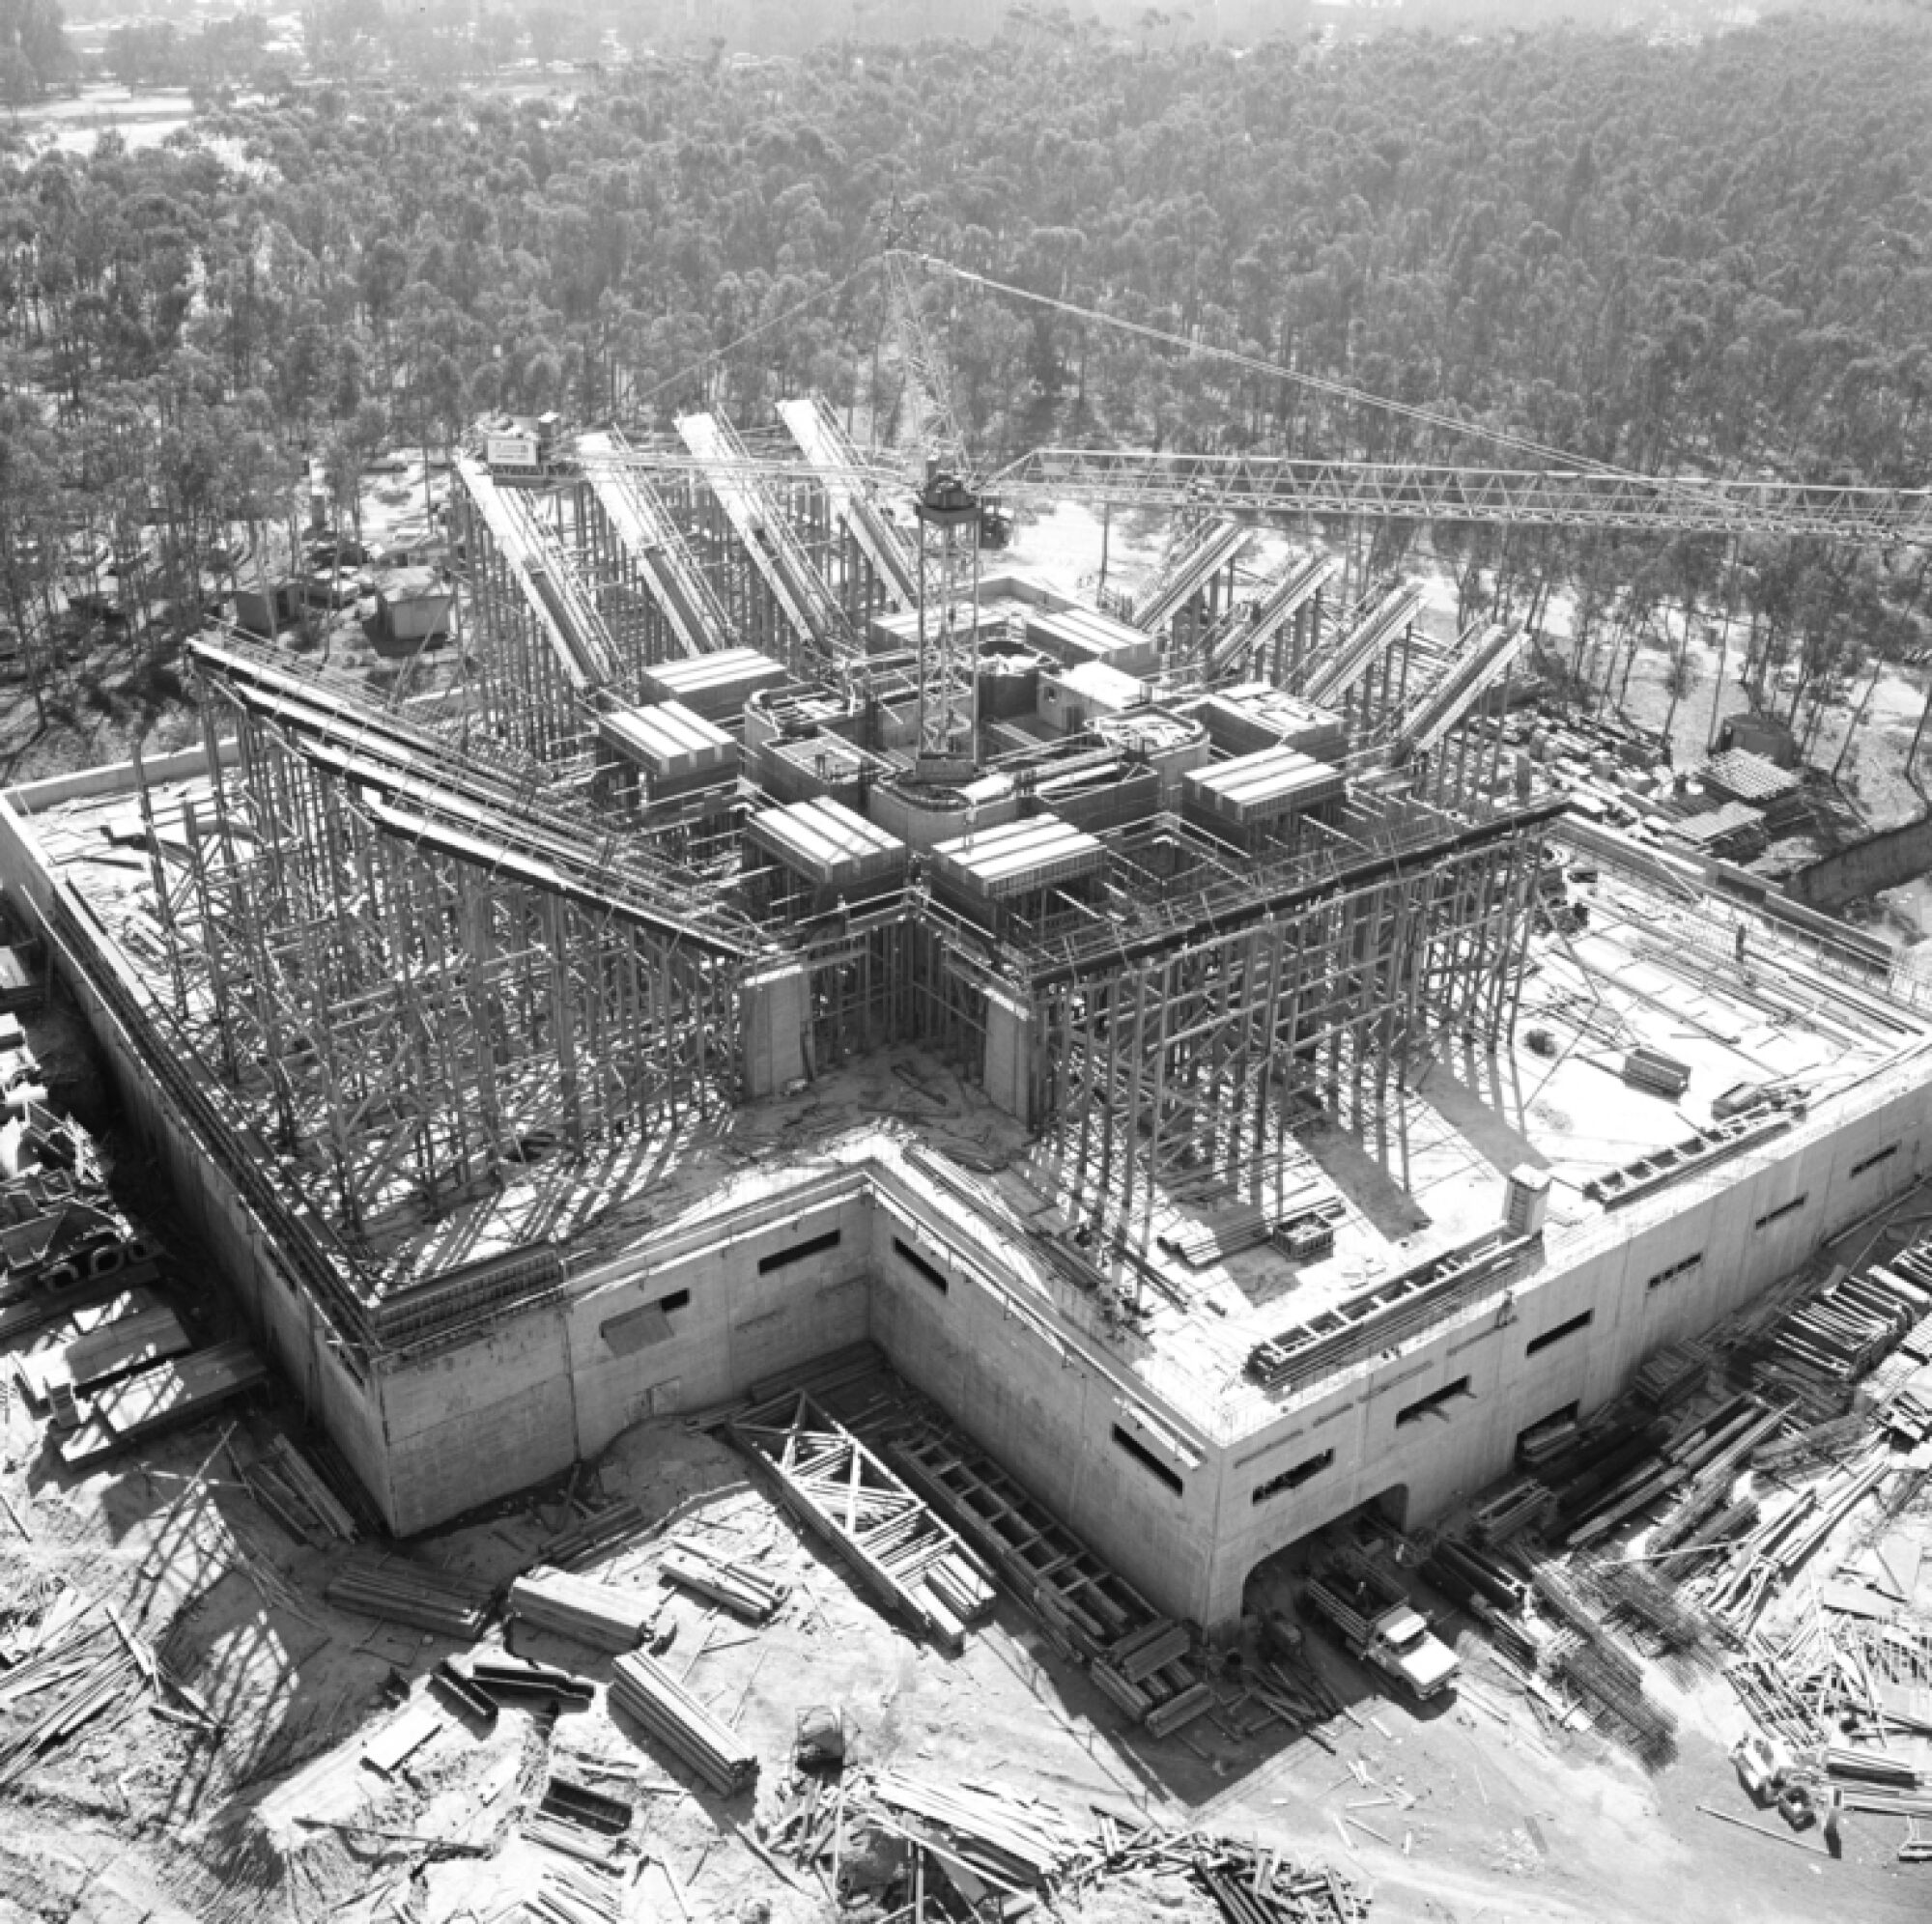 UCSD's Central Library (now Geisel Library) under construction in 1968.